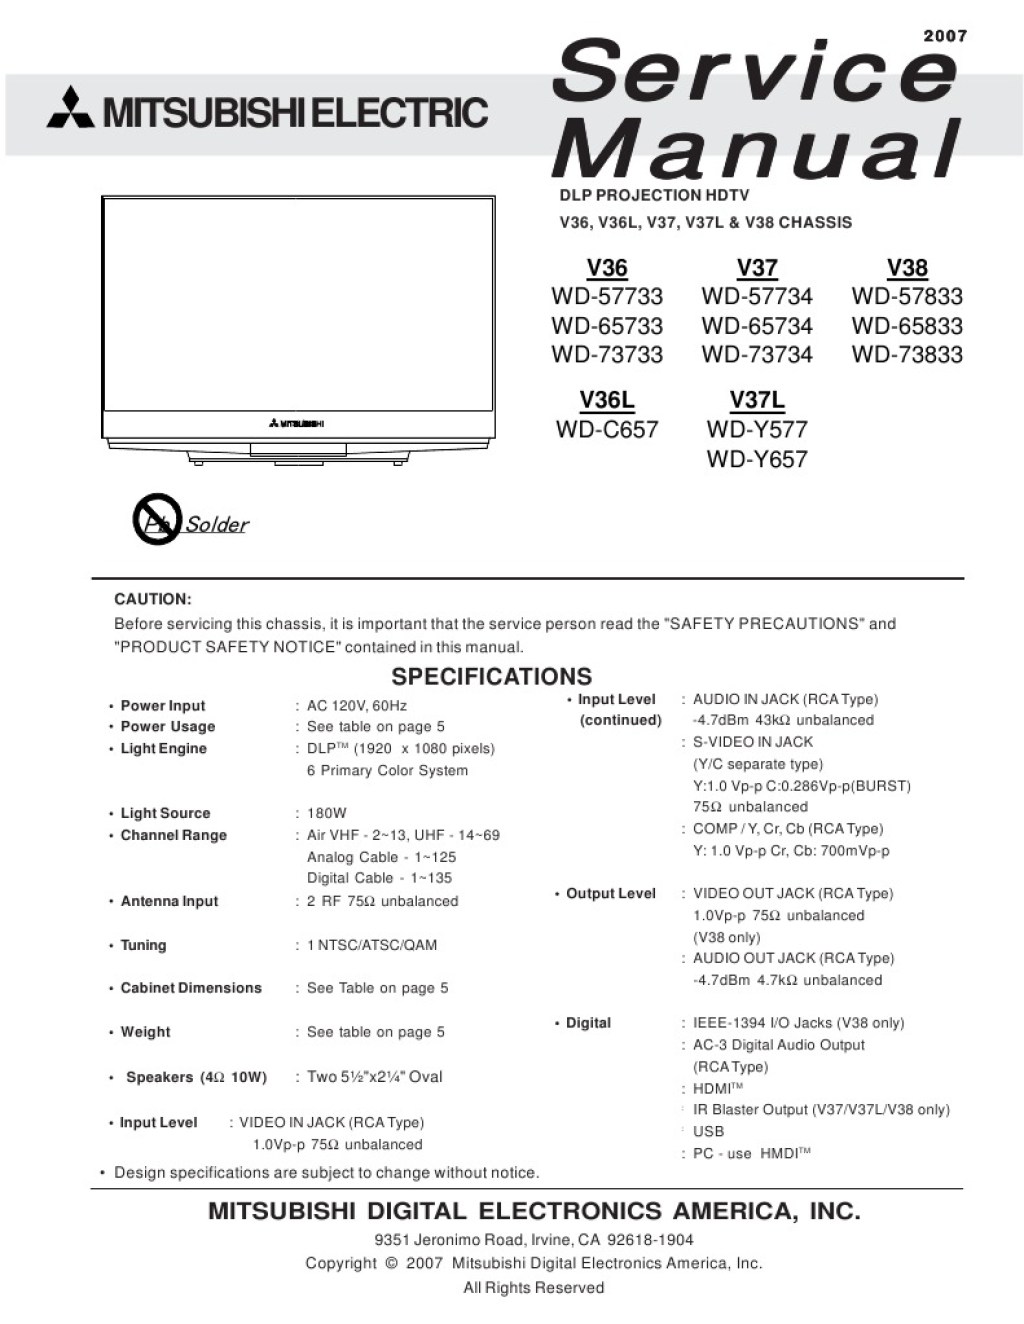 Picture of: Mitsubishi Service Manual For DLP Projection HDTV Model WD-